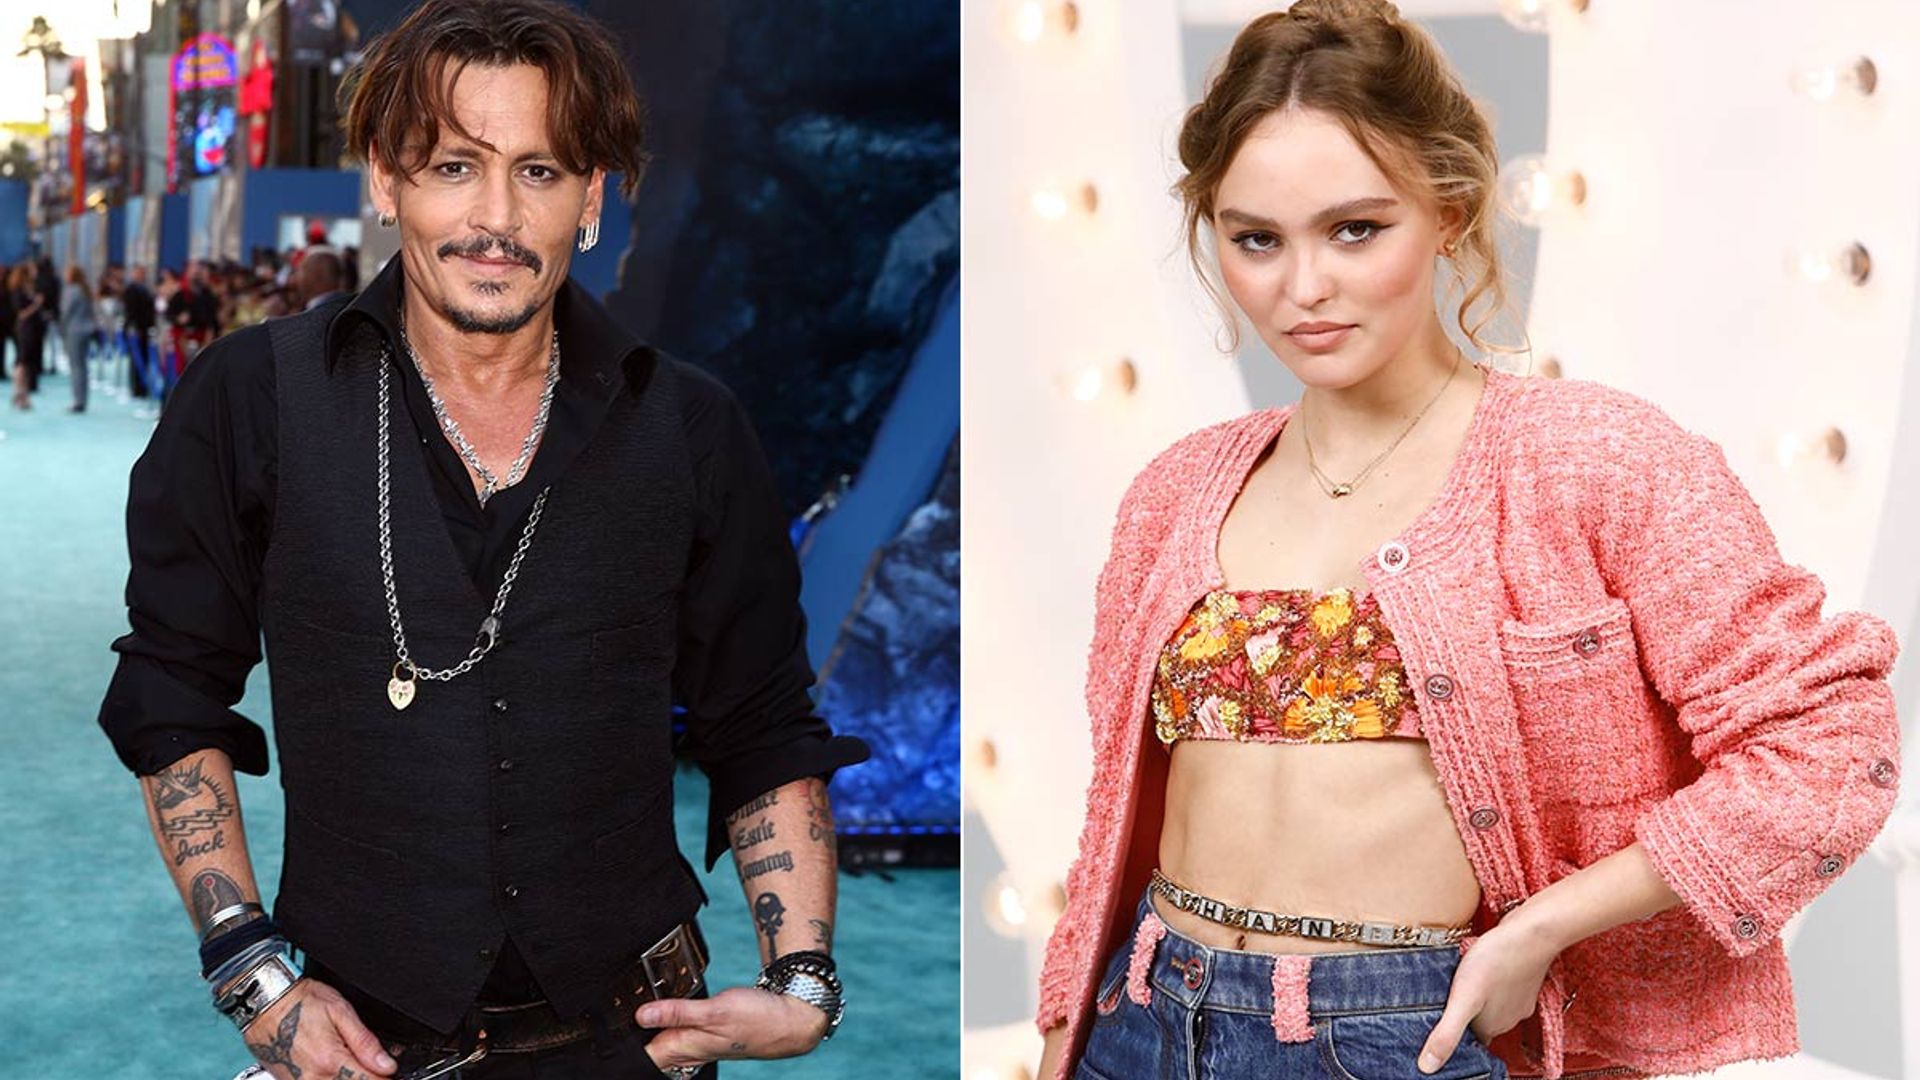 Johnny Depp Says He's Worried About Daughter Lily-Rose Depp's